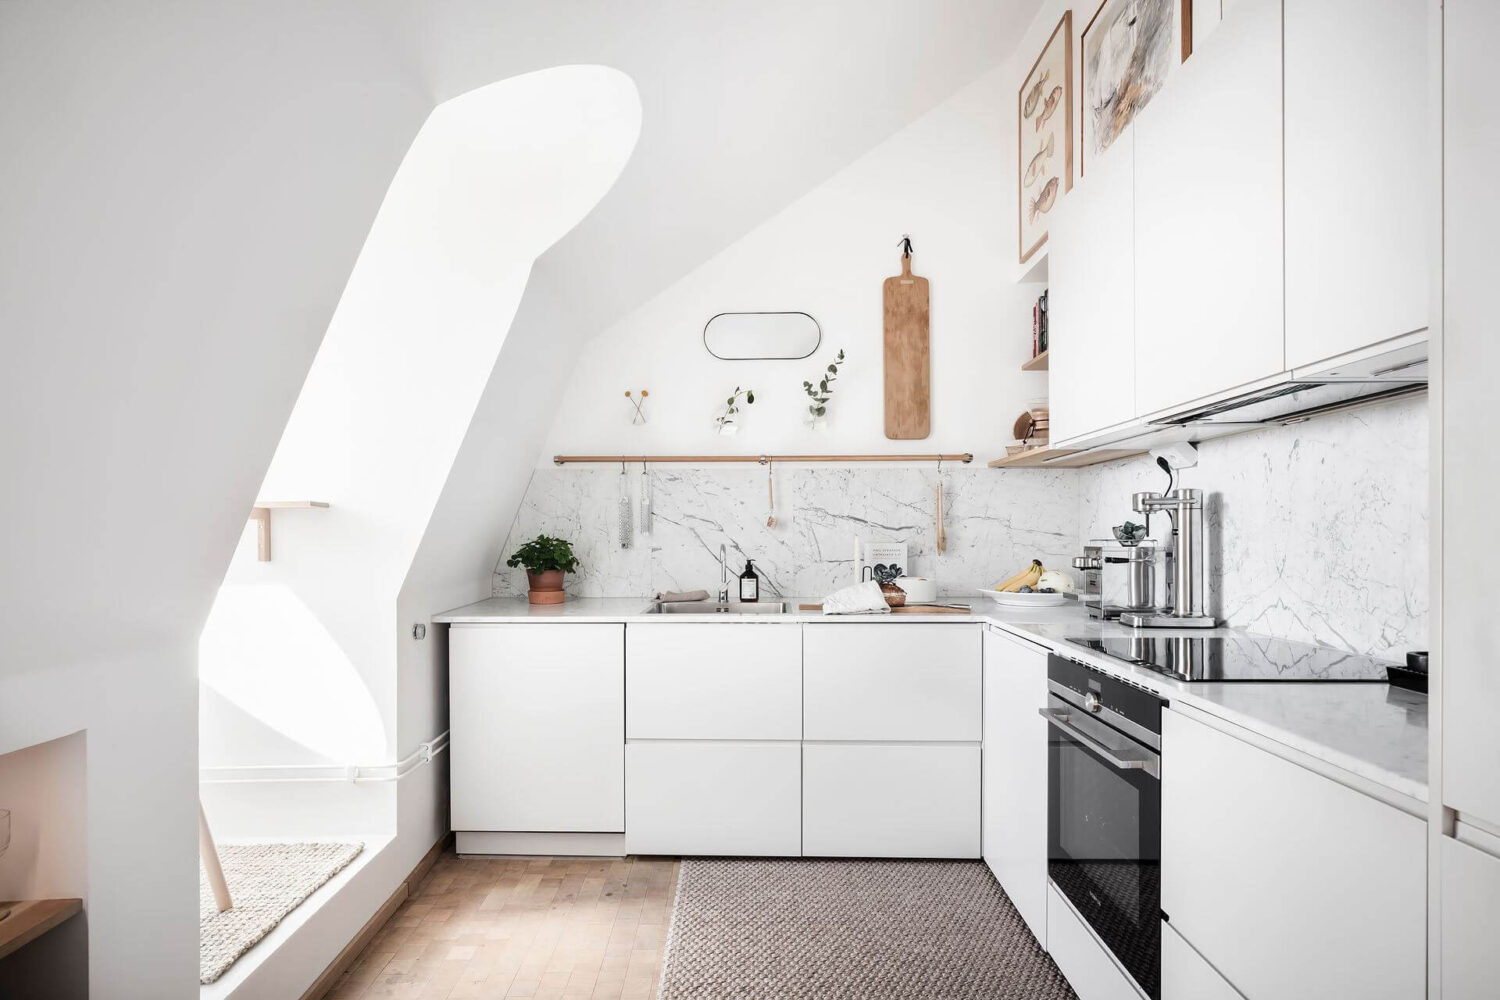 white-kitchen-window-seat-slanted-ceilings-nordroom